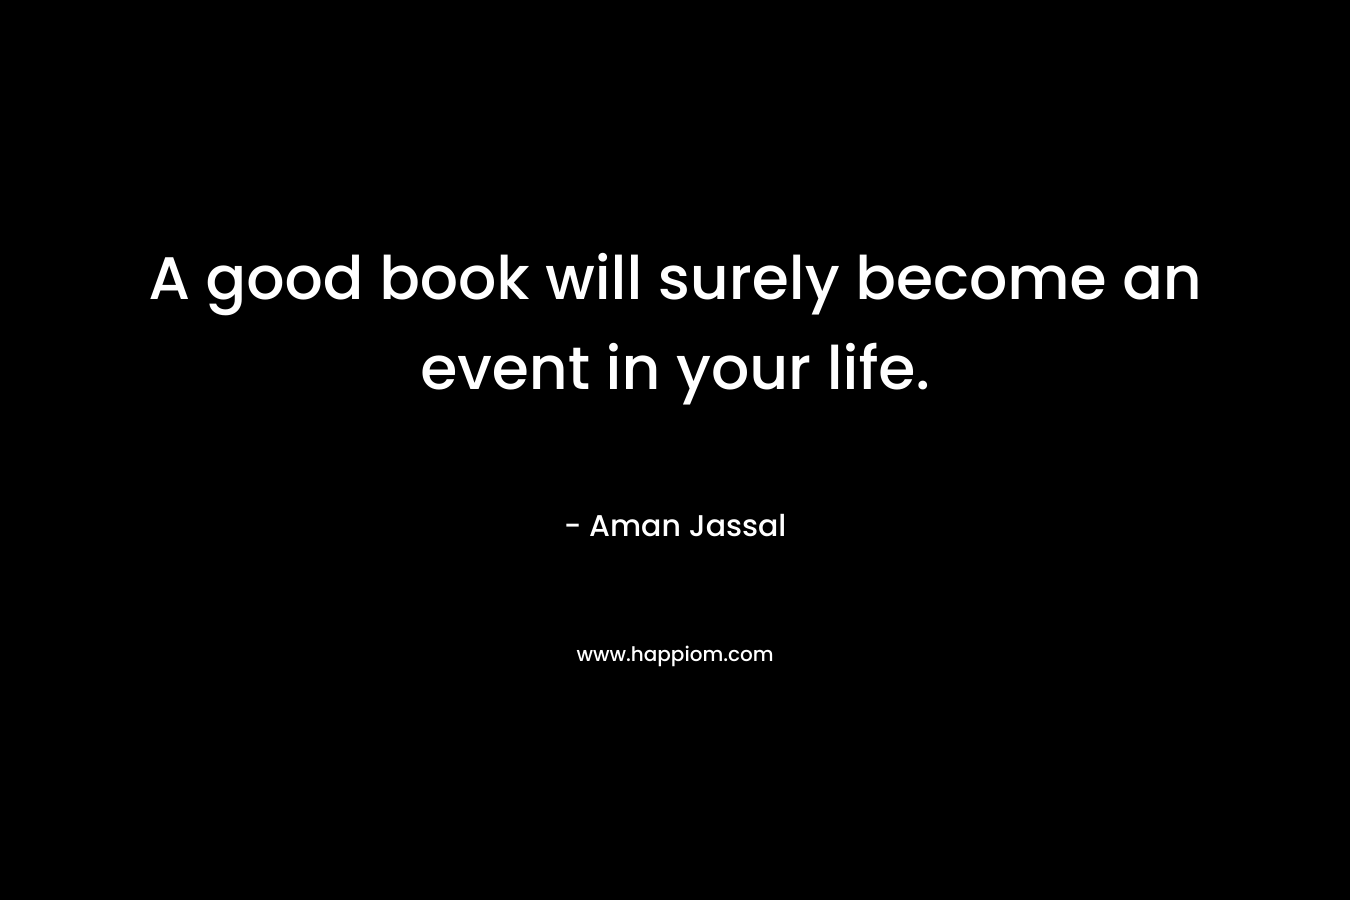 A good book will surely become an event in your life. – Aman Jassal